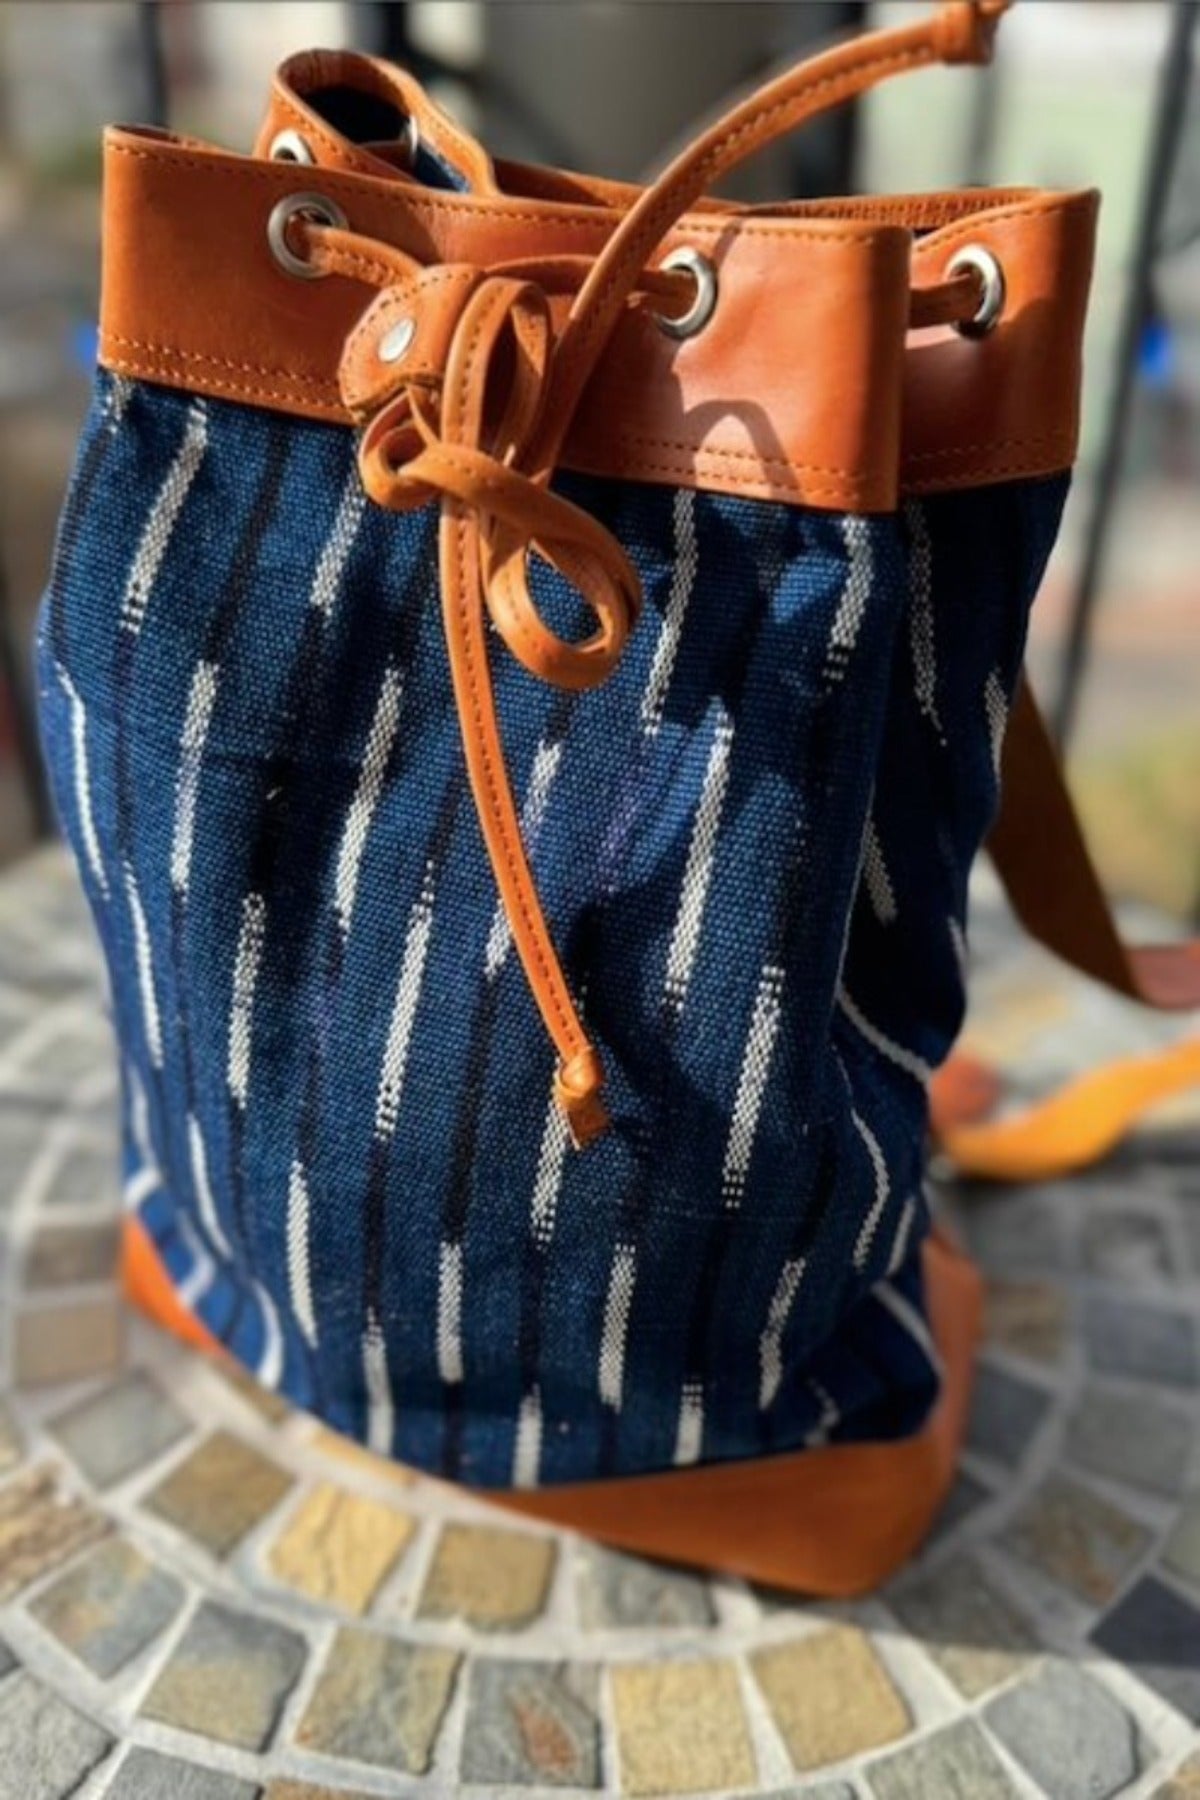 Blue backpack with genuine leather